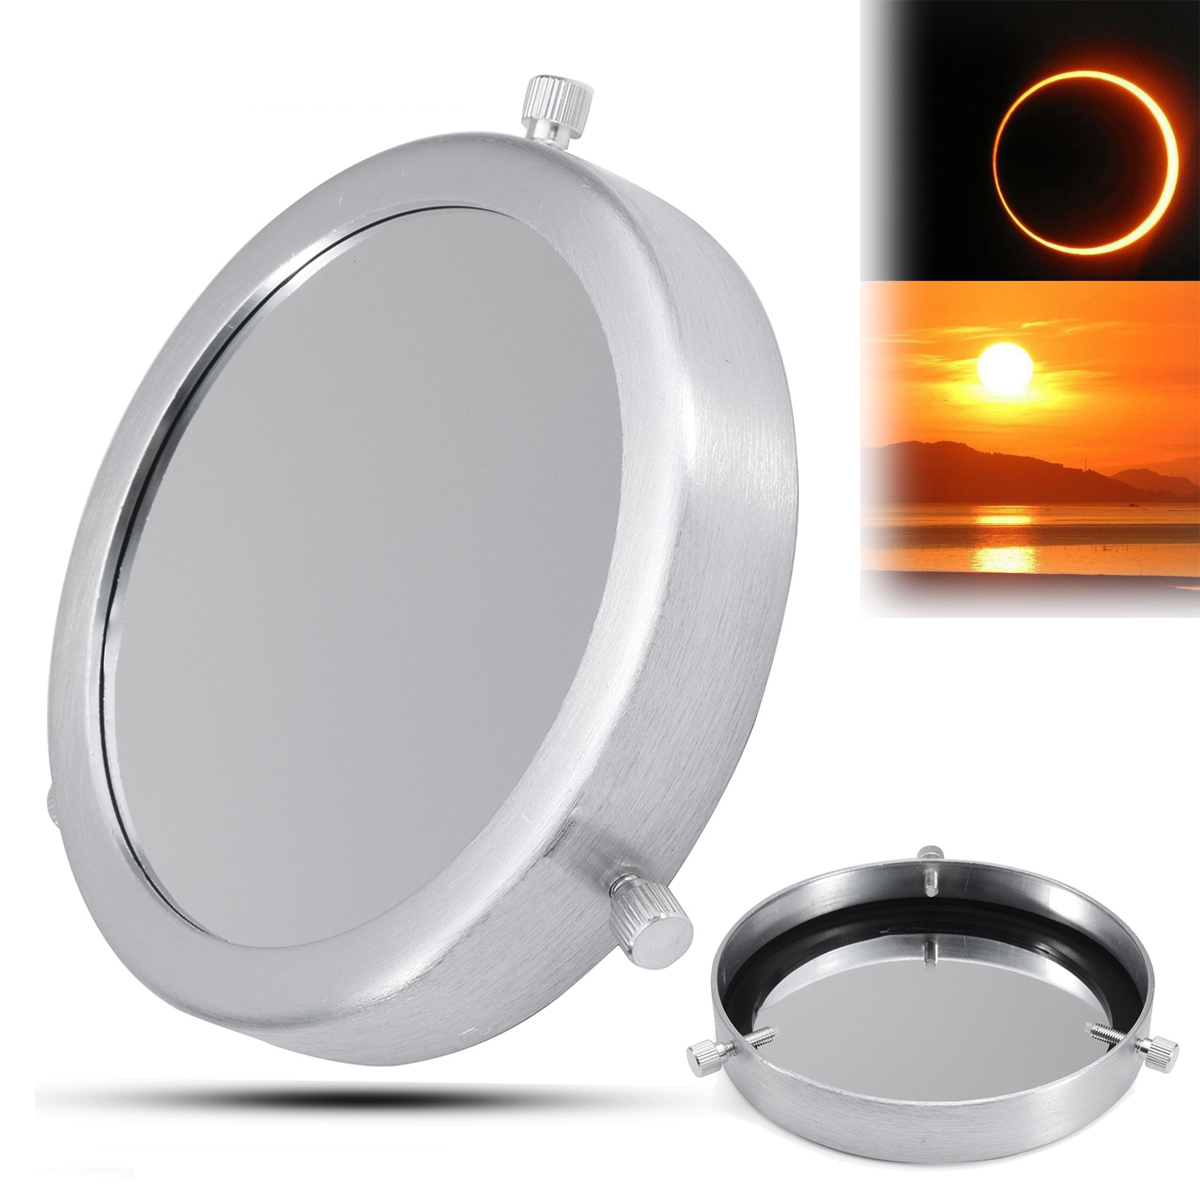 Silver 70-92mm Solar Filter Baader Film Metal Cover For Astronomical Telescope 1